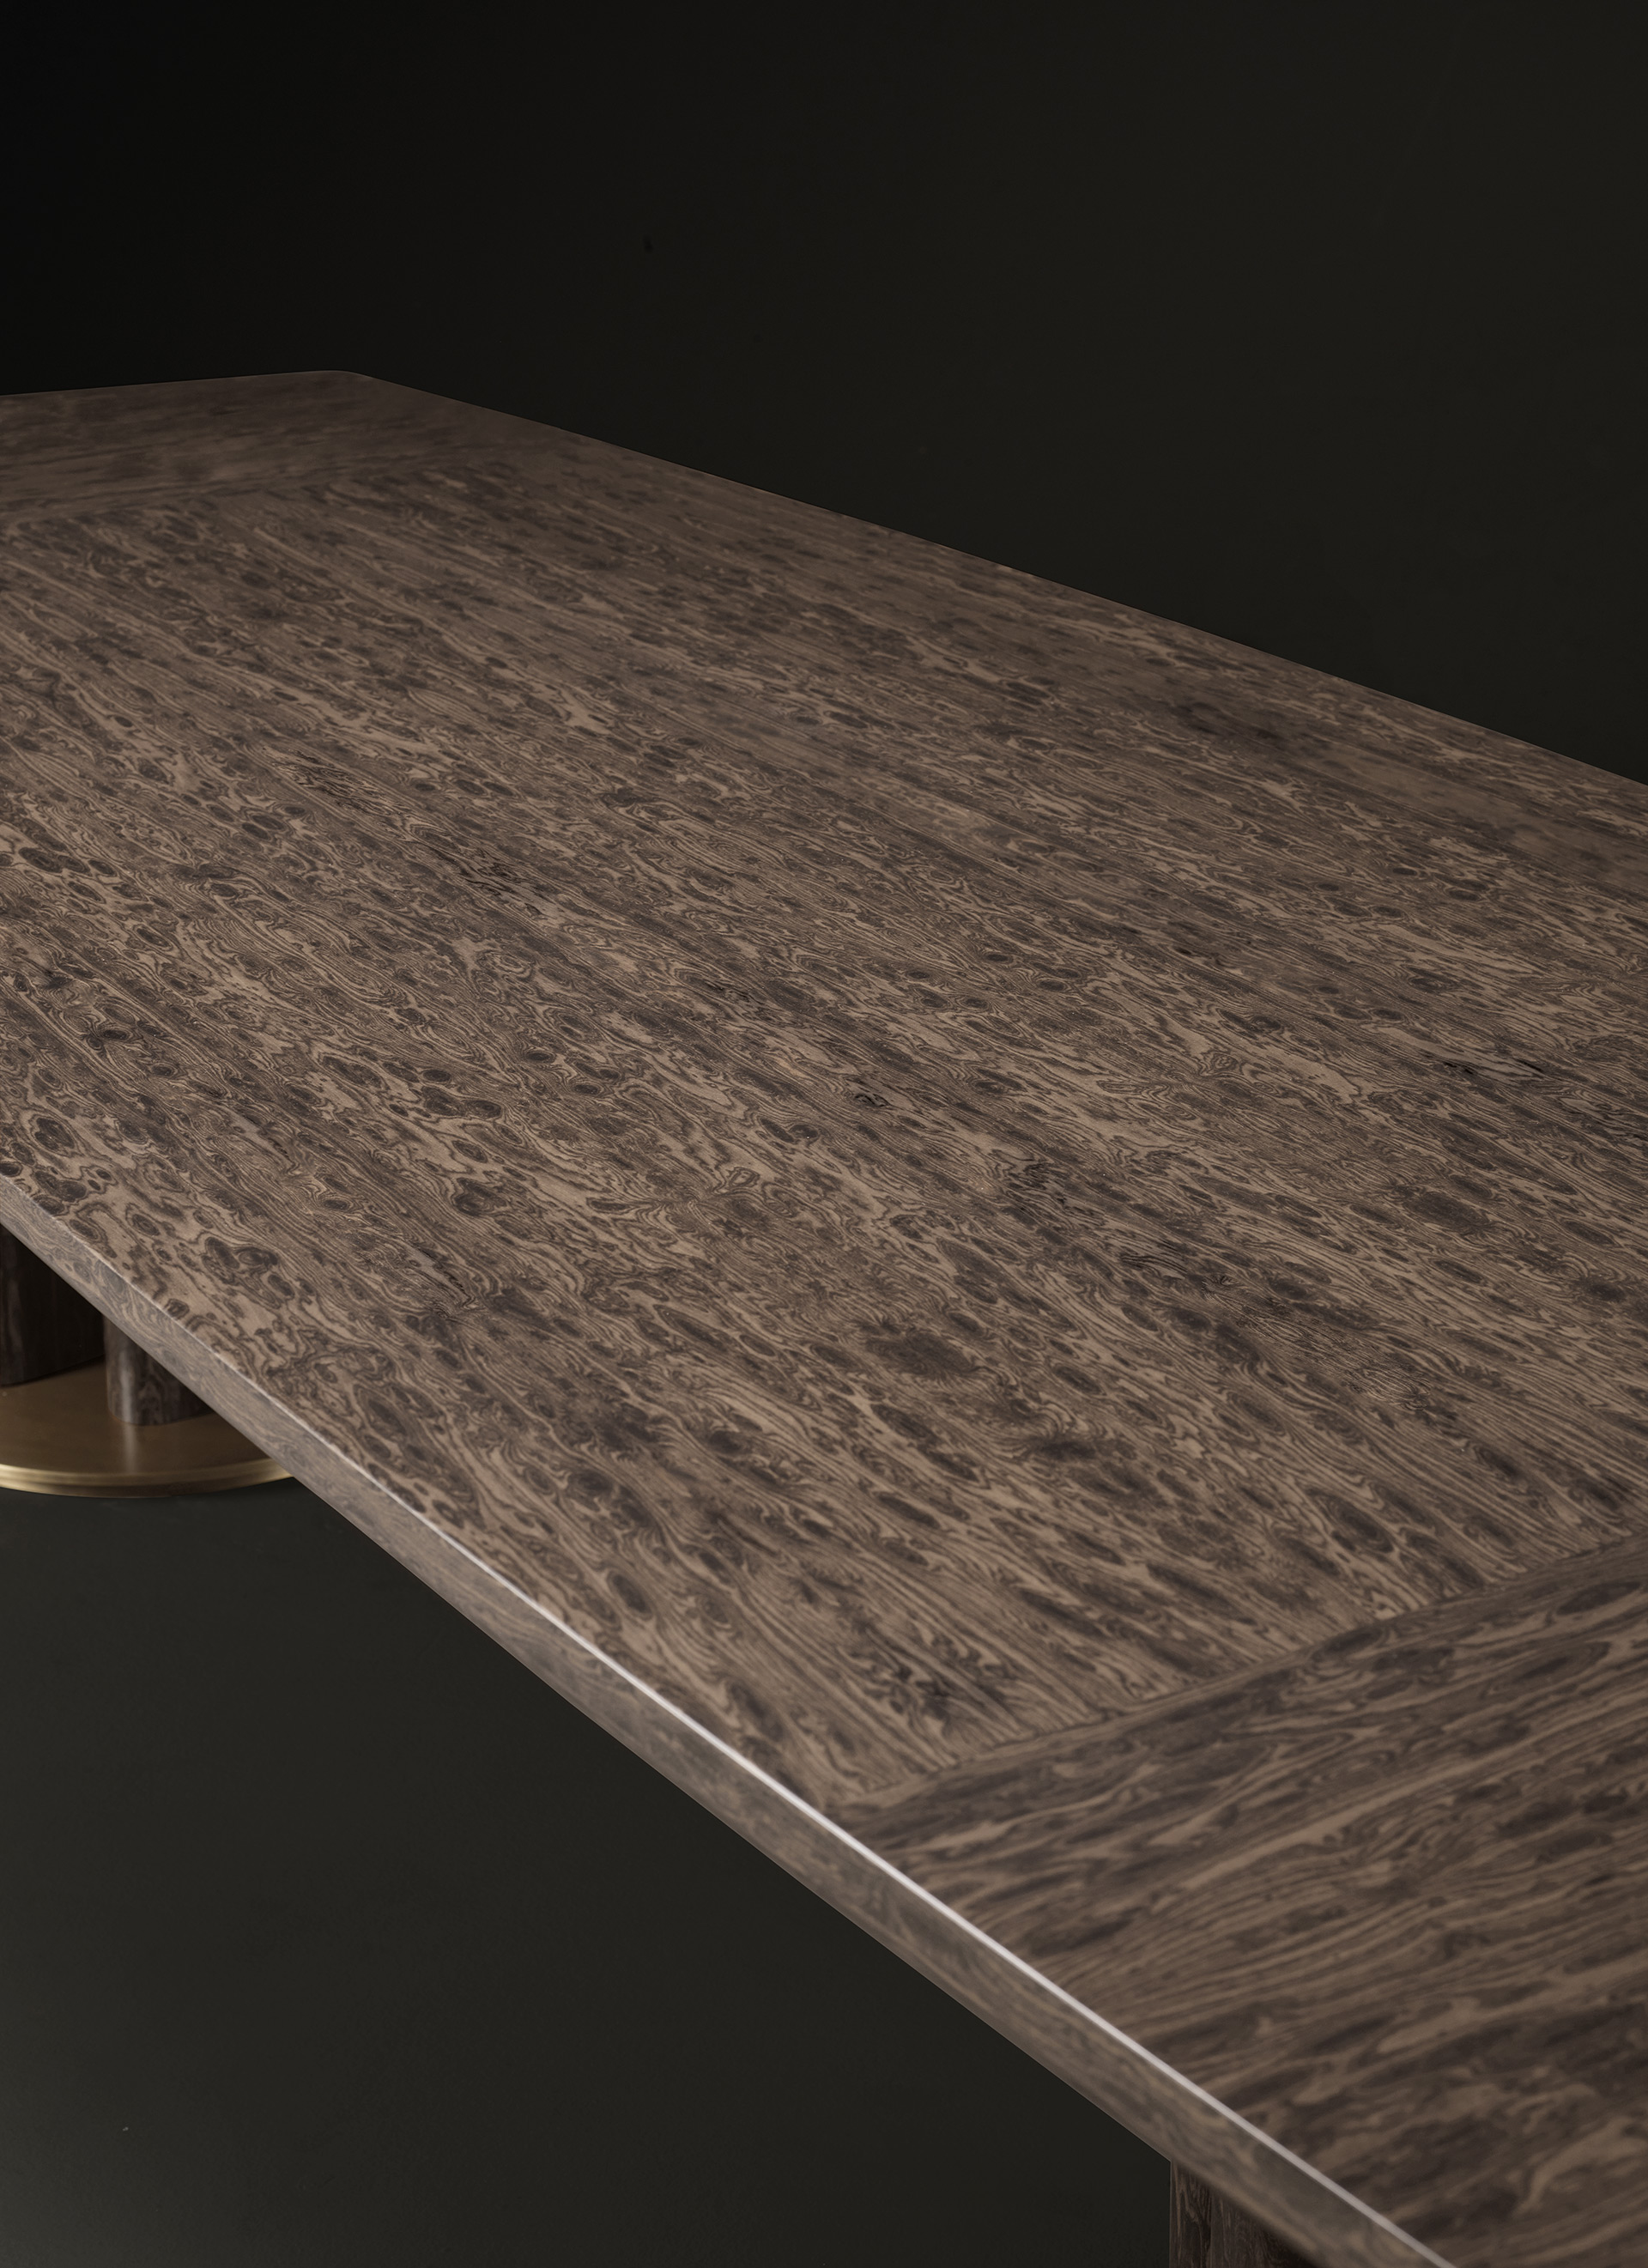 Top detail of Orazio, a wooden and bronze dining table, from Promemoria's Amaranthine Tales collection | Promemoria